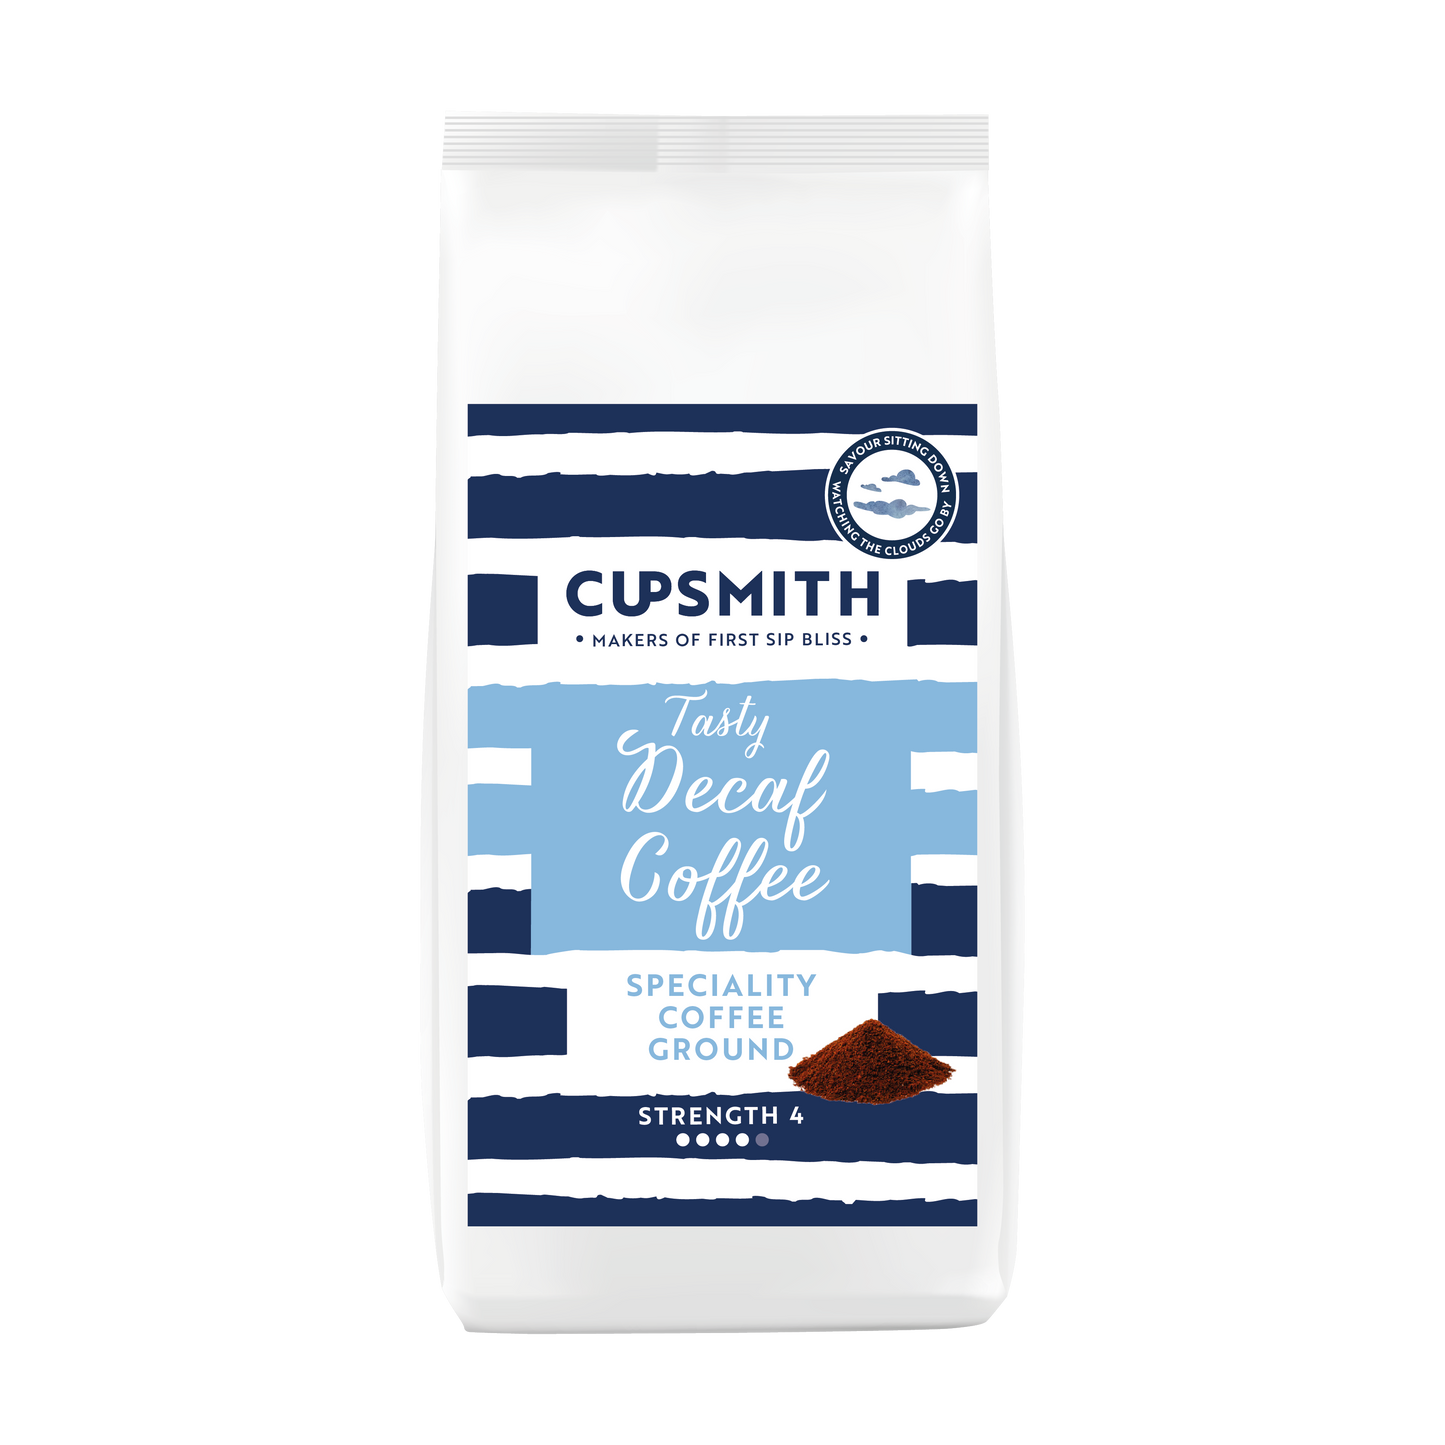 Cupsmith Speciality Decaf Coffee - beans & ground